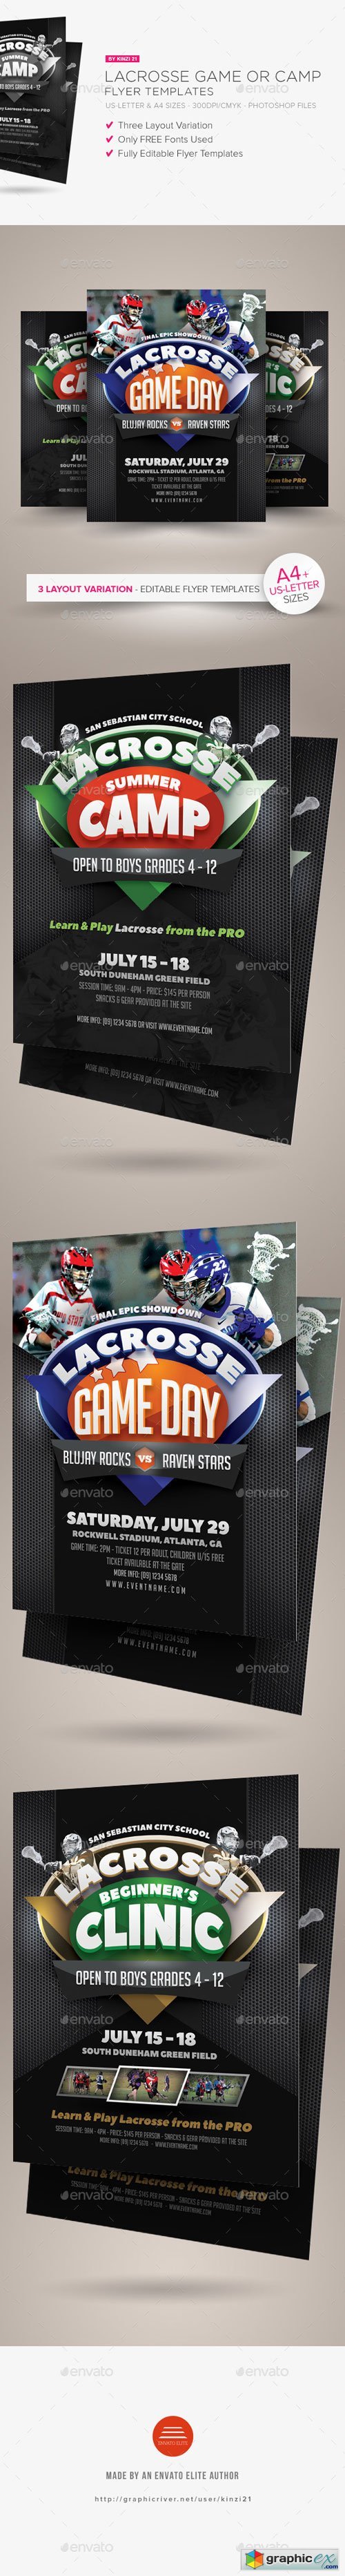 Lacrosse Game or Camp Flyer Templates